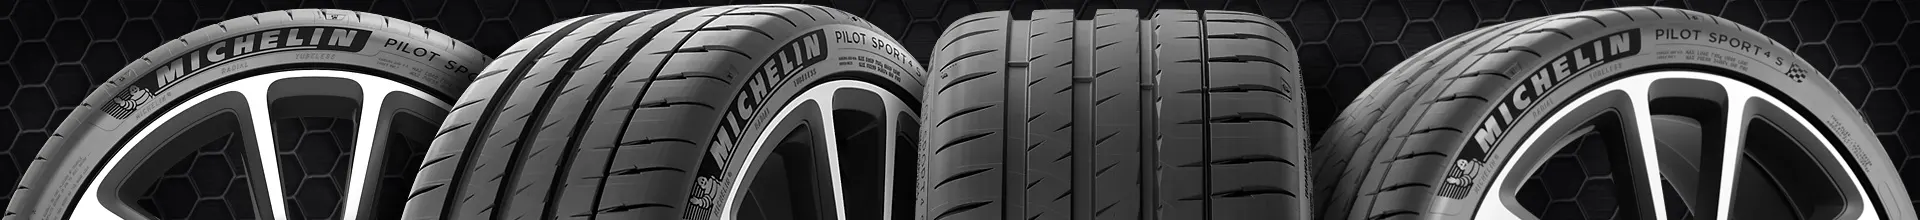 225 55 19 discount tires from Online Wheels Direct